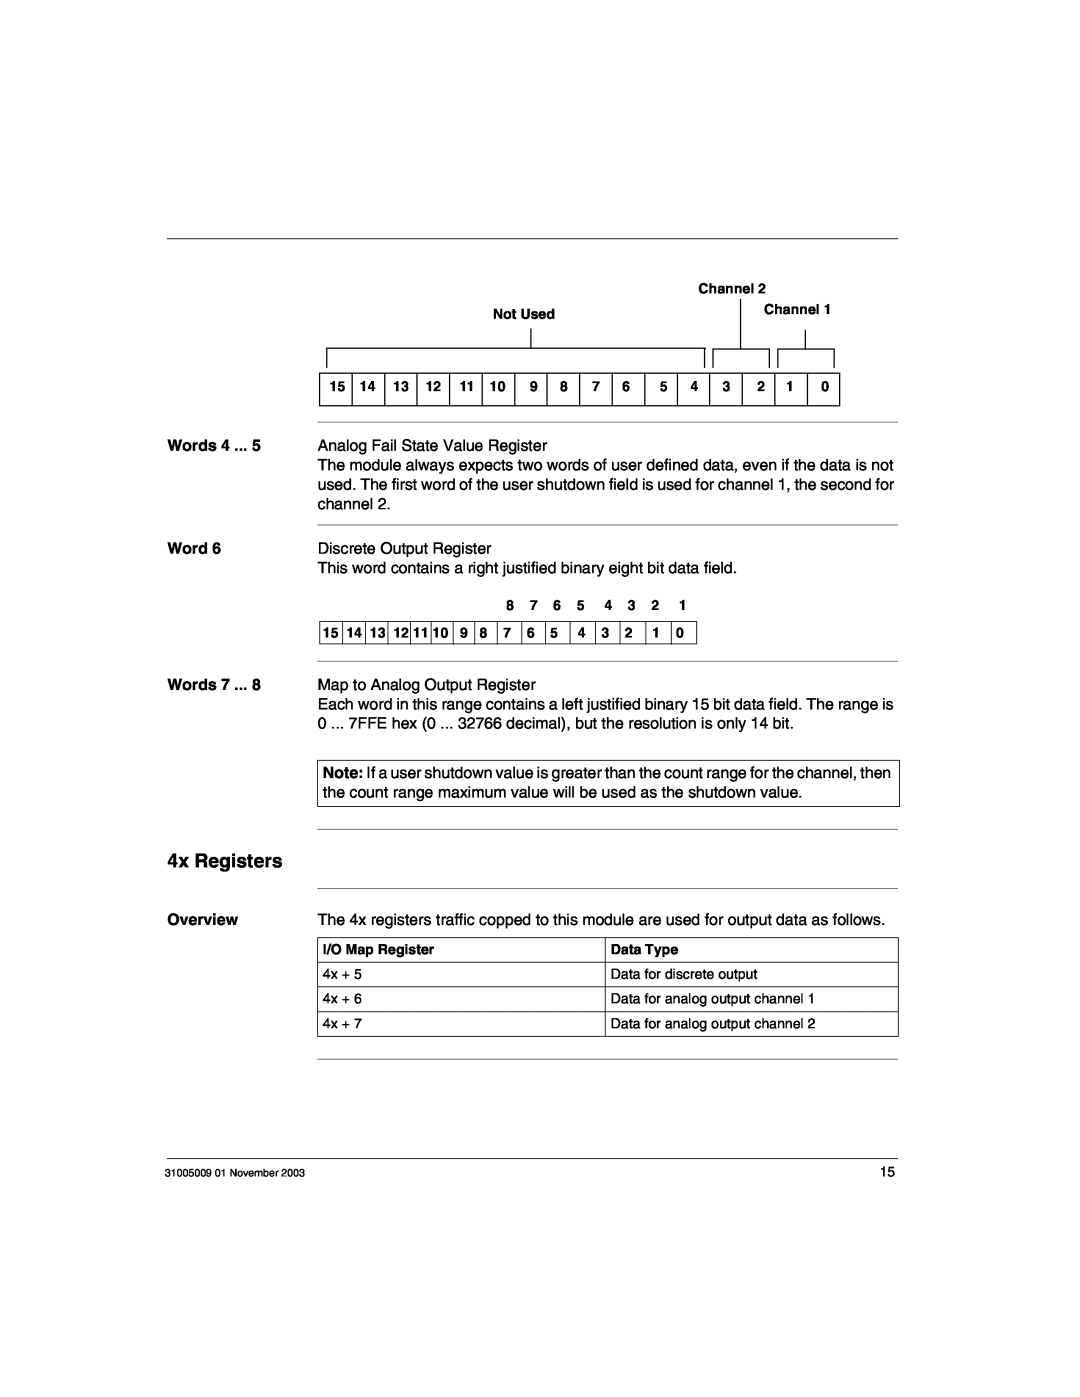 Schneider Electric 170AMM11030 manual 4x Registers, Words 4, channel, Discrete Output Register, Overview 